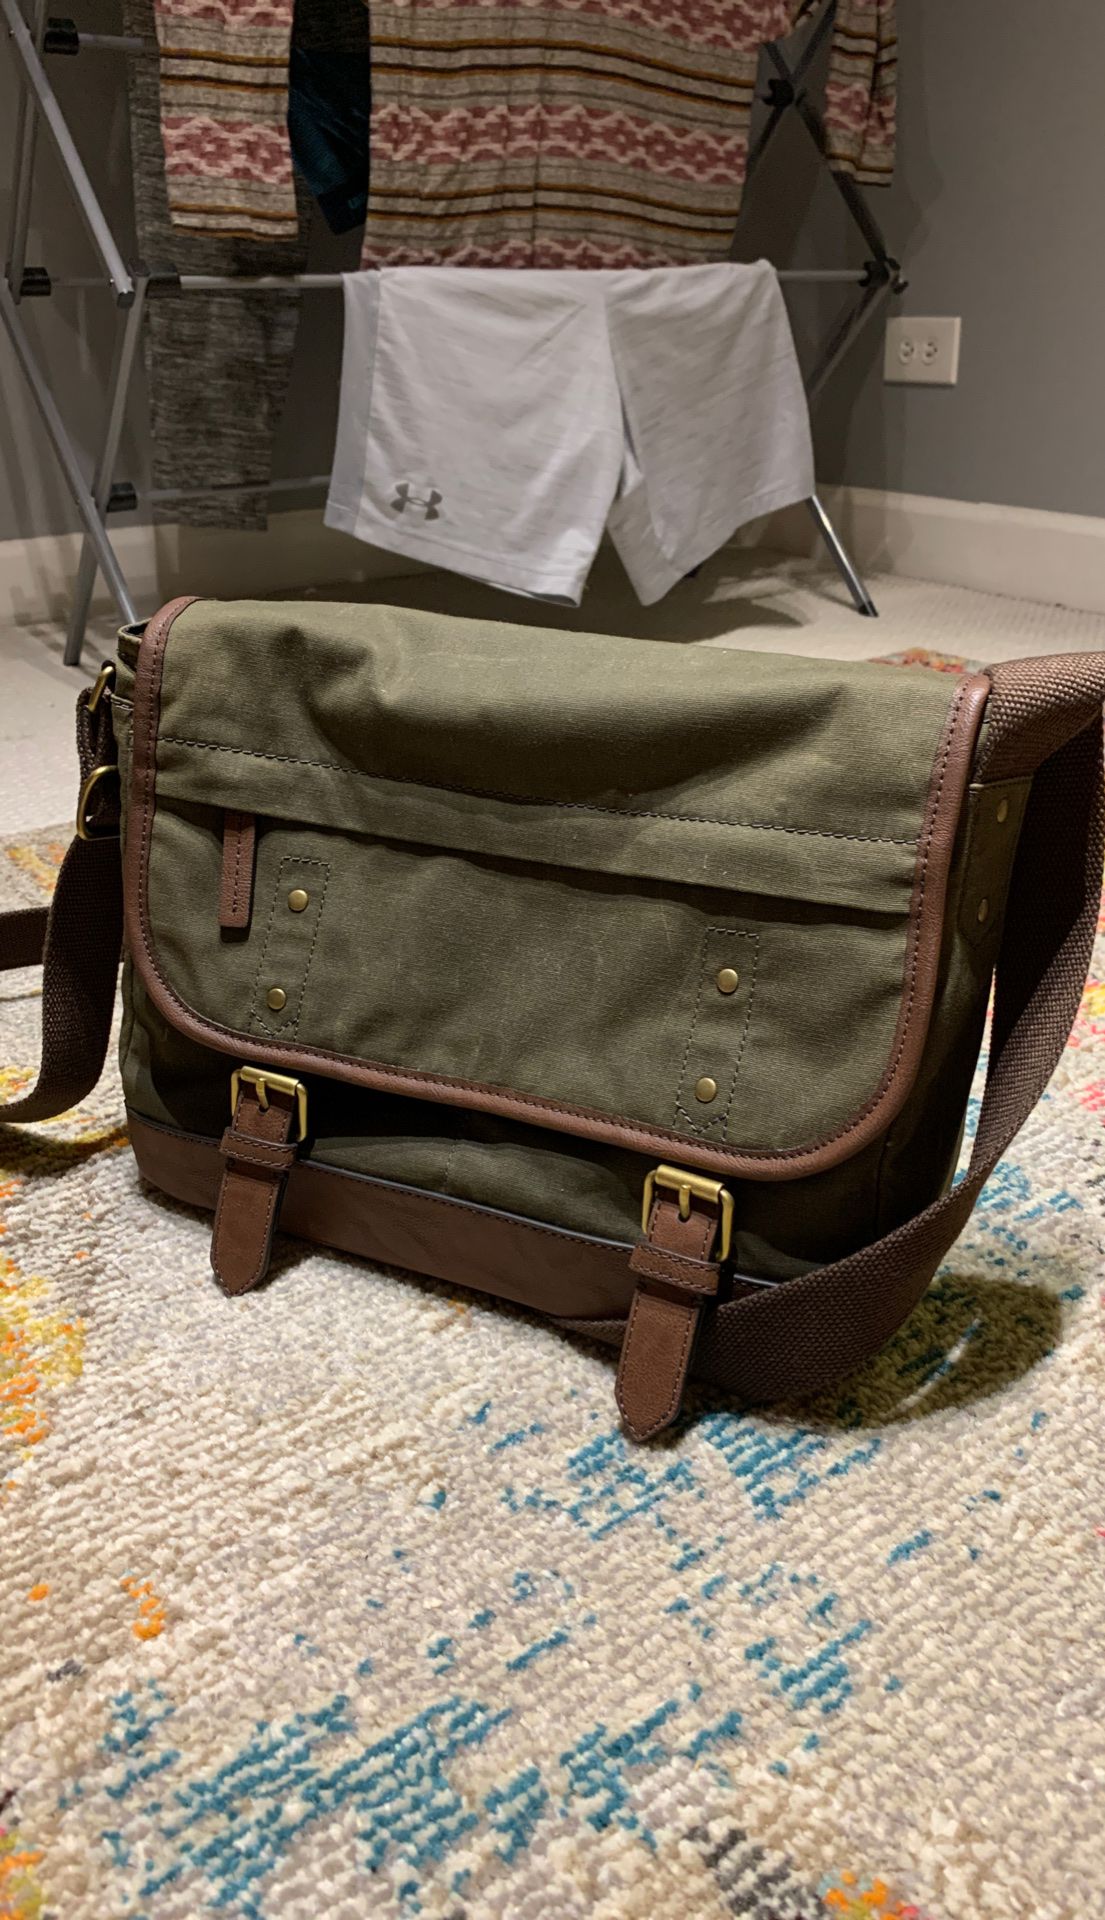 *BRAND NEW* FOSSIL Canvas Messenger Bag (Olive Green)